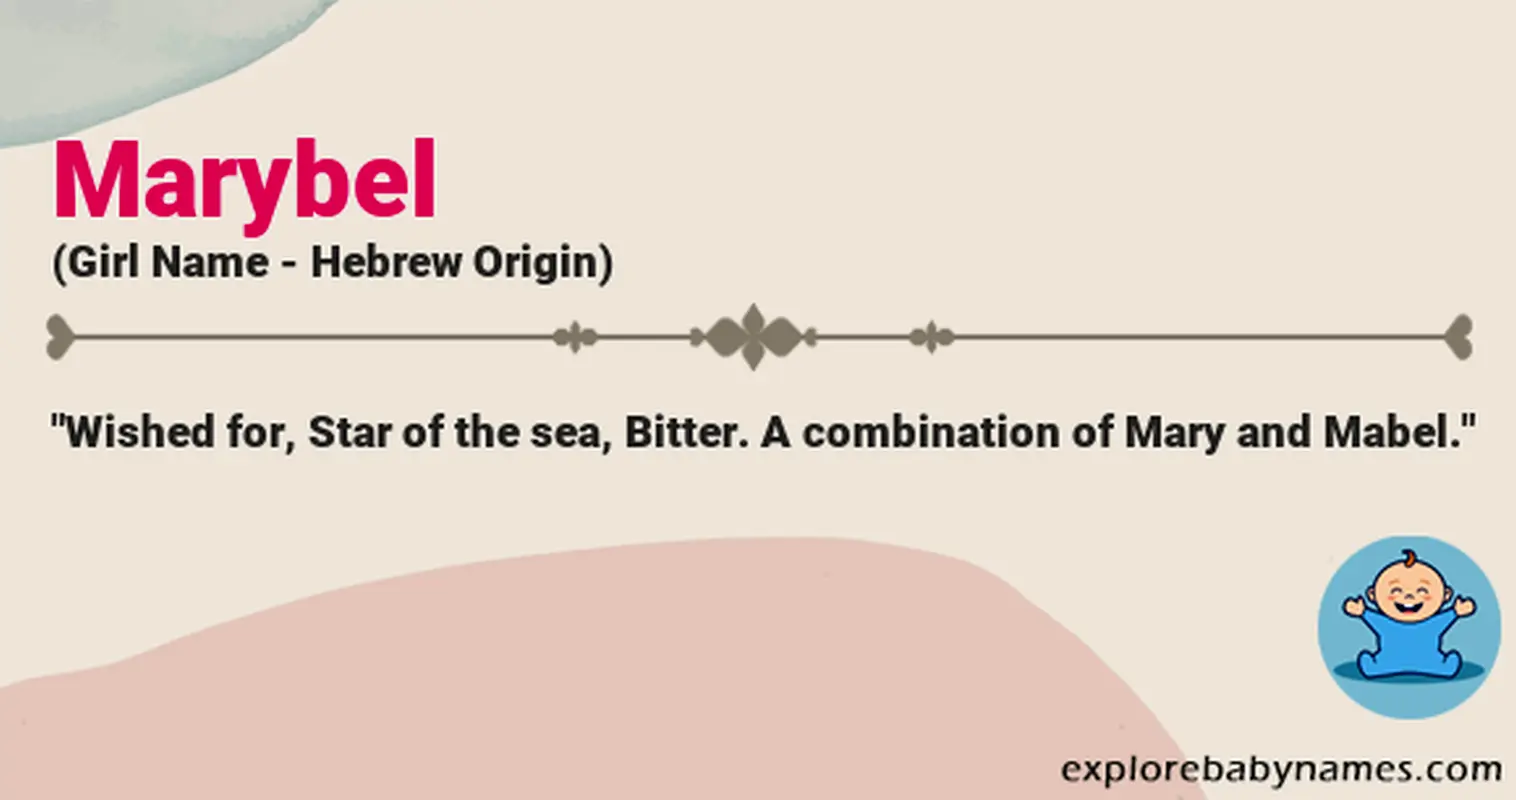 Meaning of Marybel